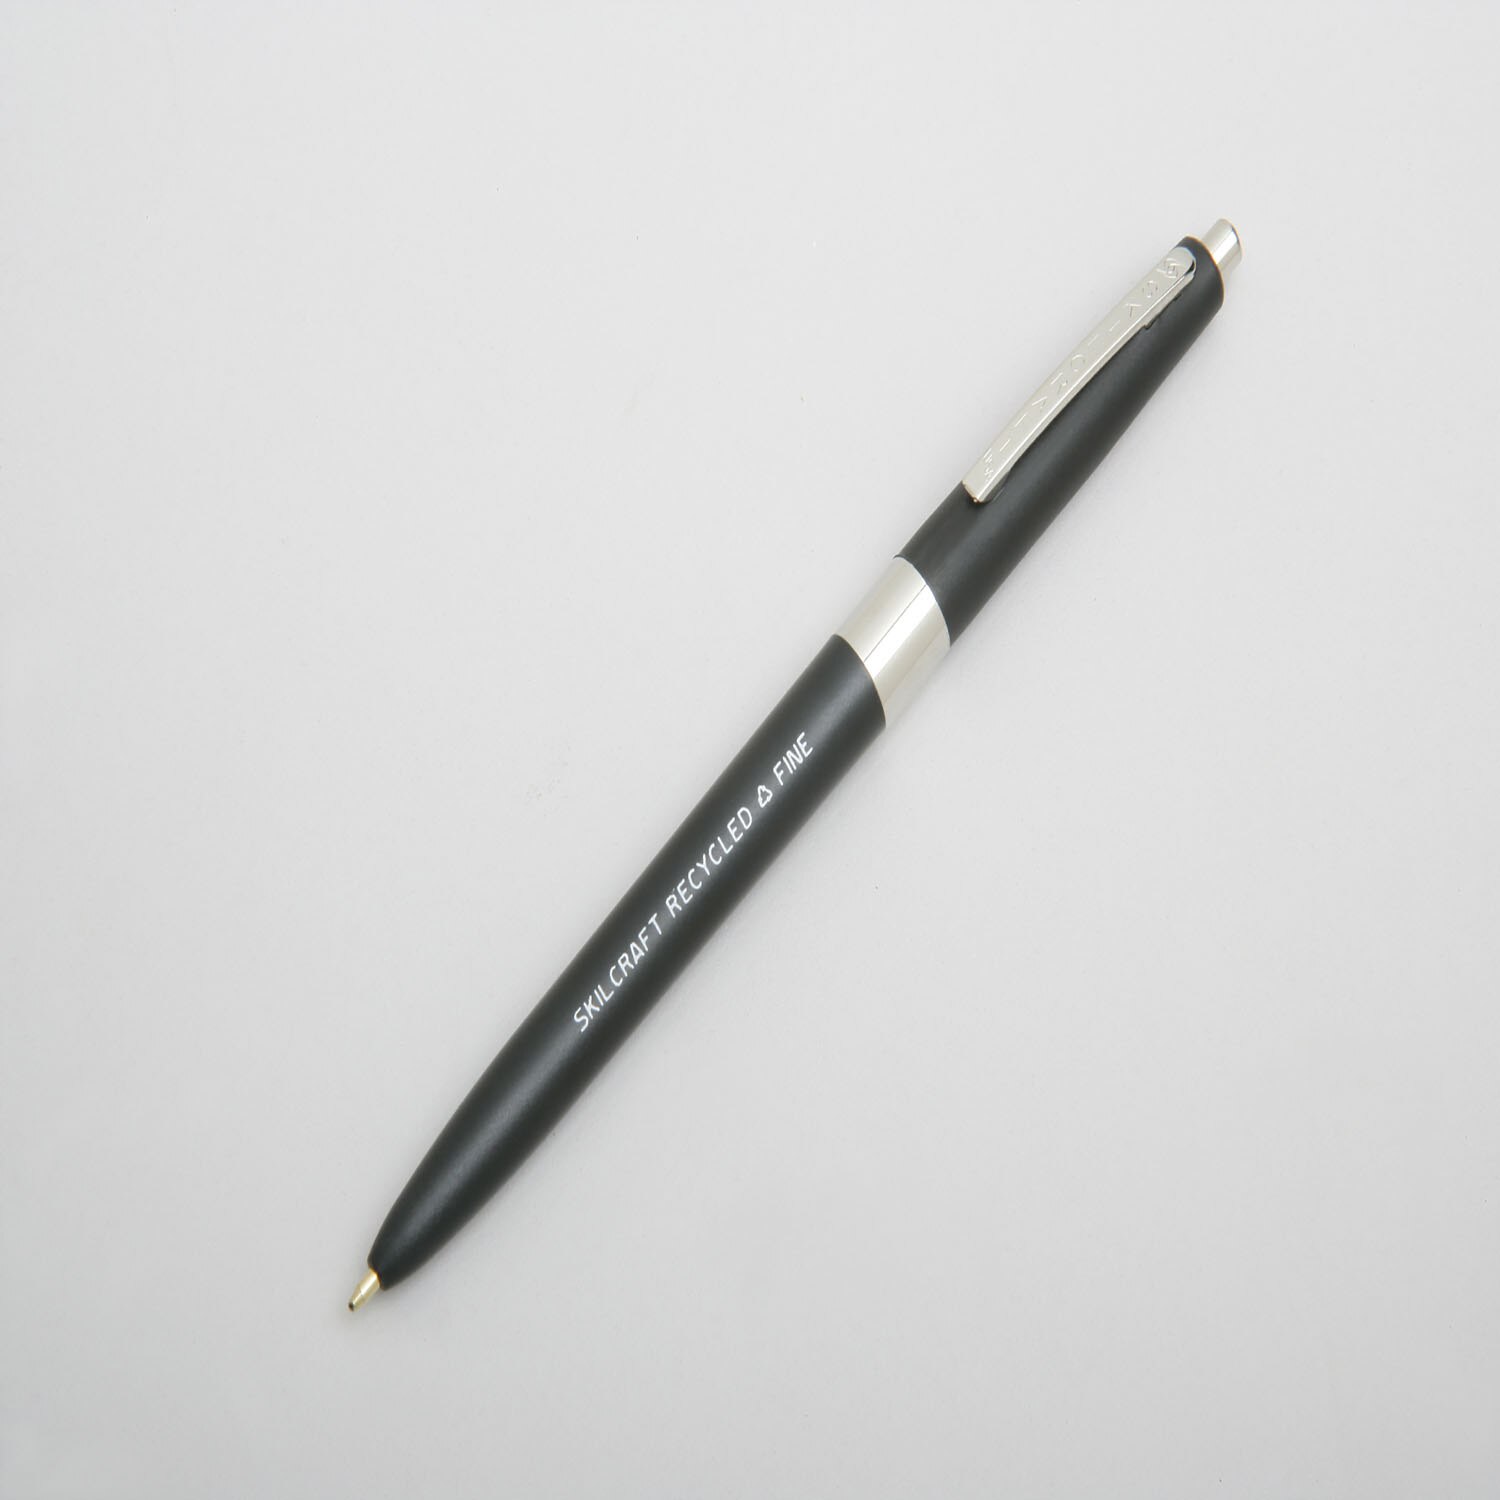 Pen, Ballpoint, Retractable, Recycled, "RECYCLED", Black, Fine Point